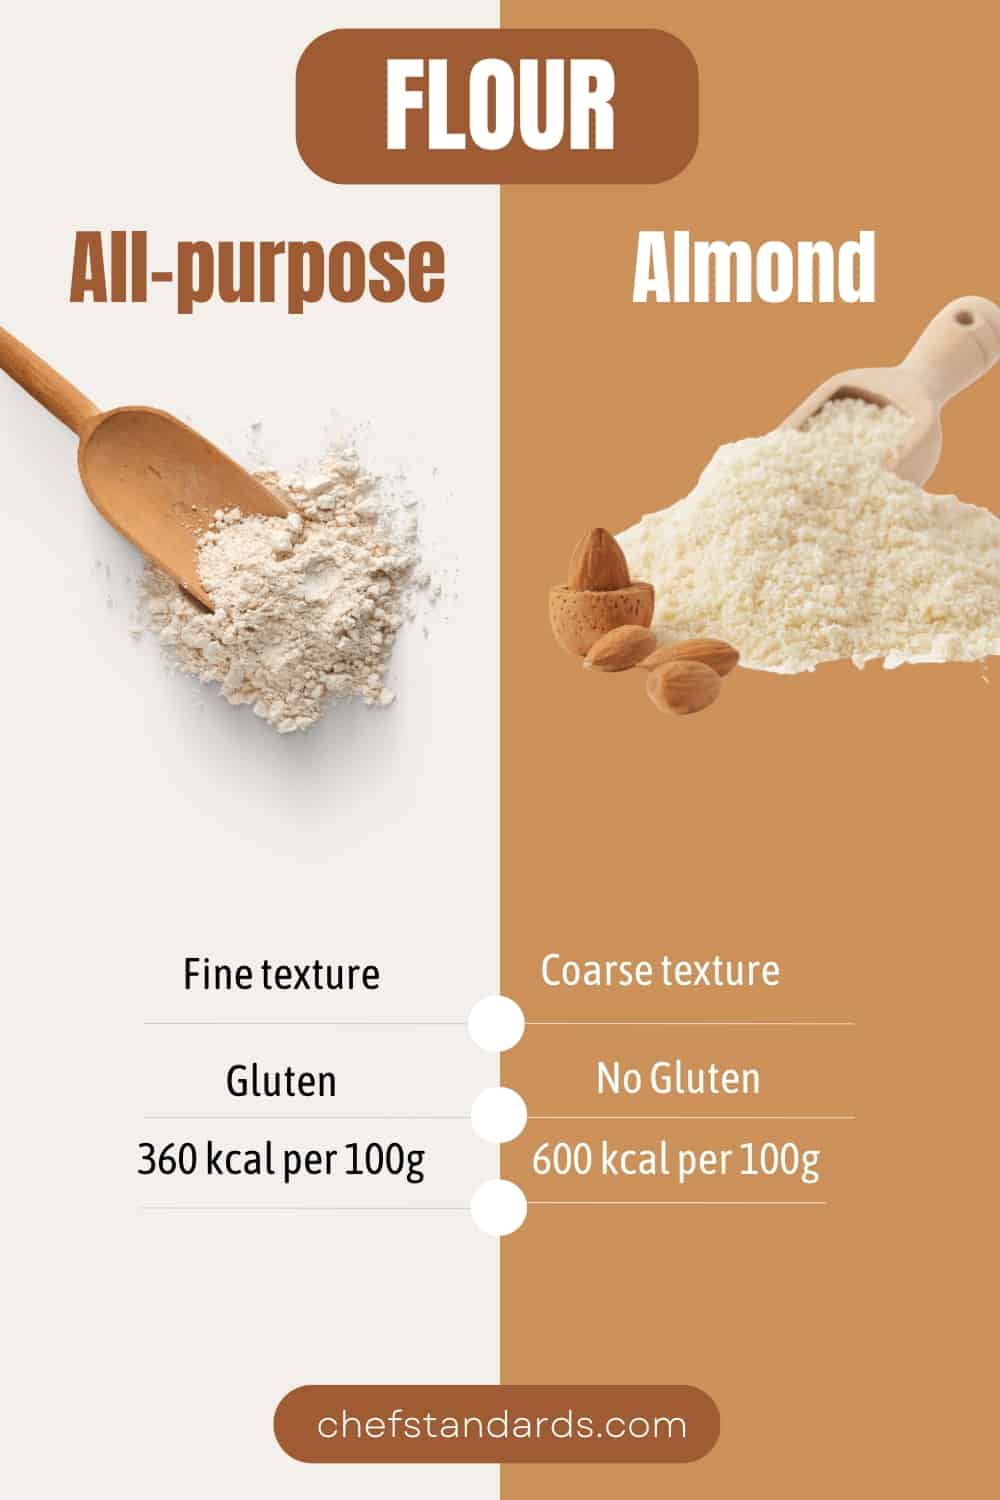 difference between almond flour and regular flour